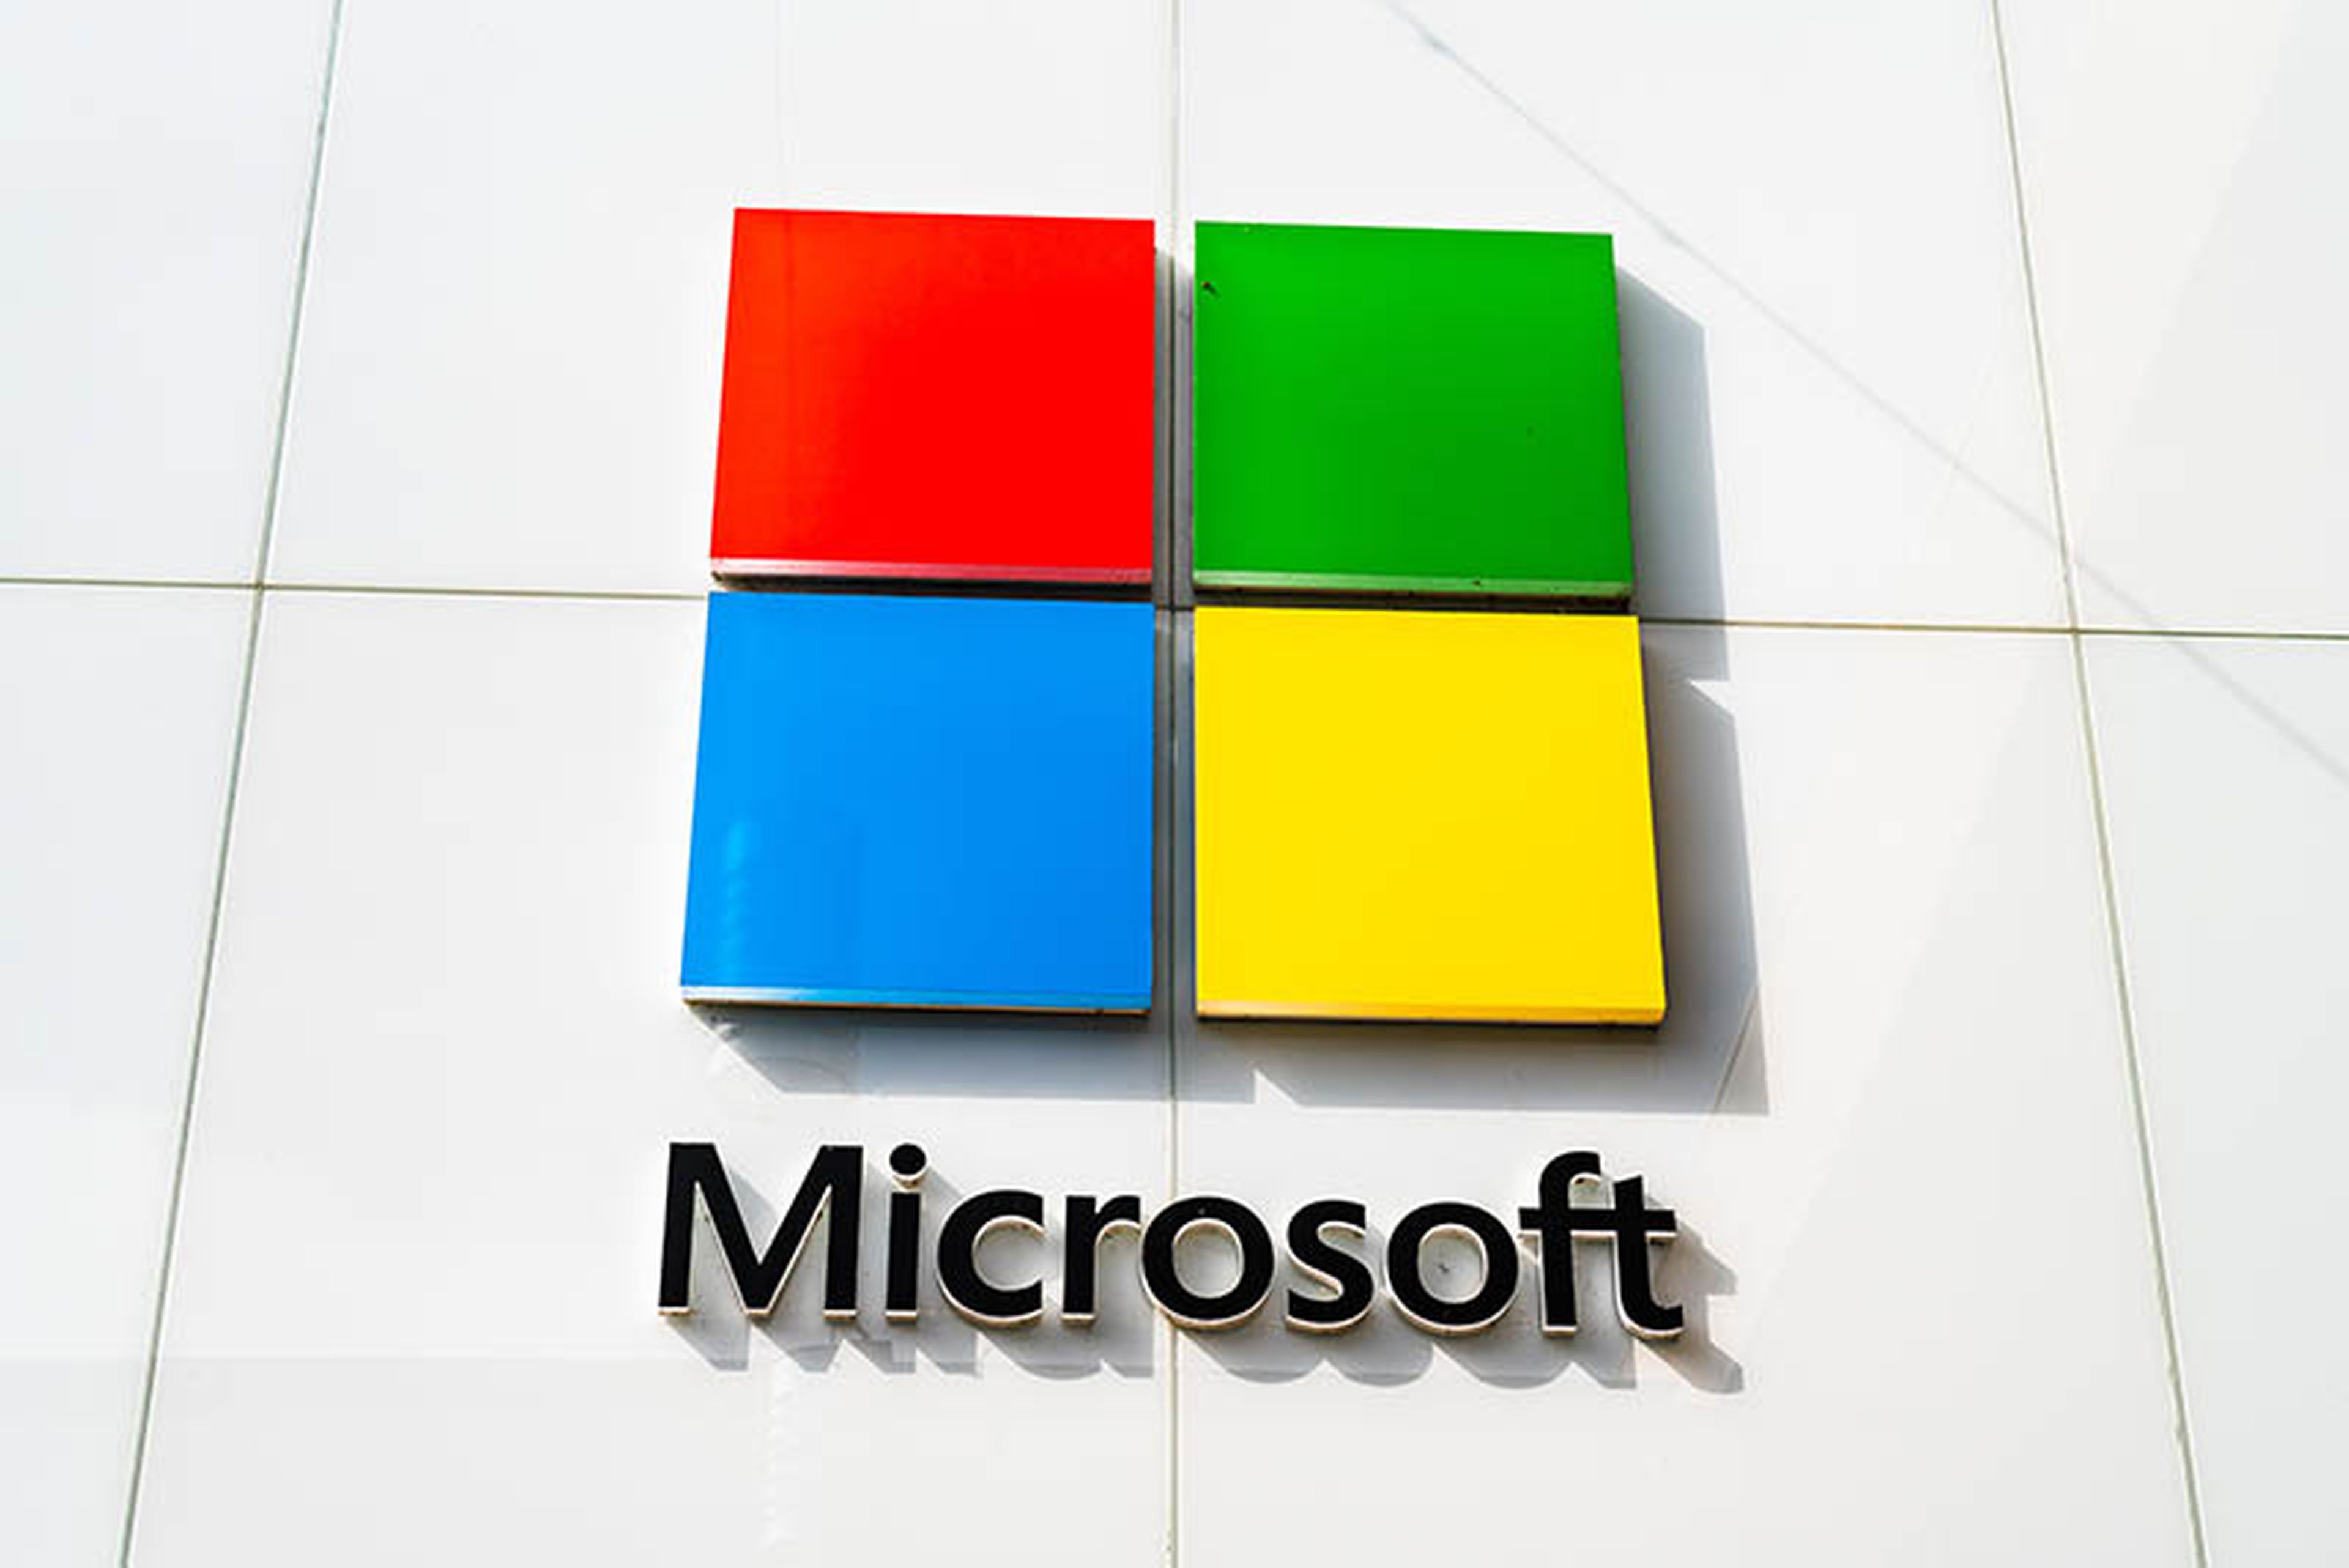 Microsoft fixes 4 actively exploited zero-day bugs, working on a 5th